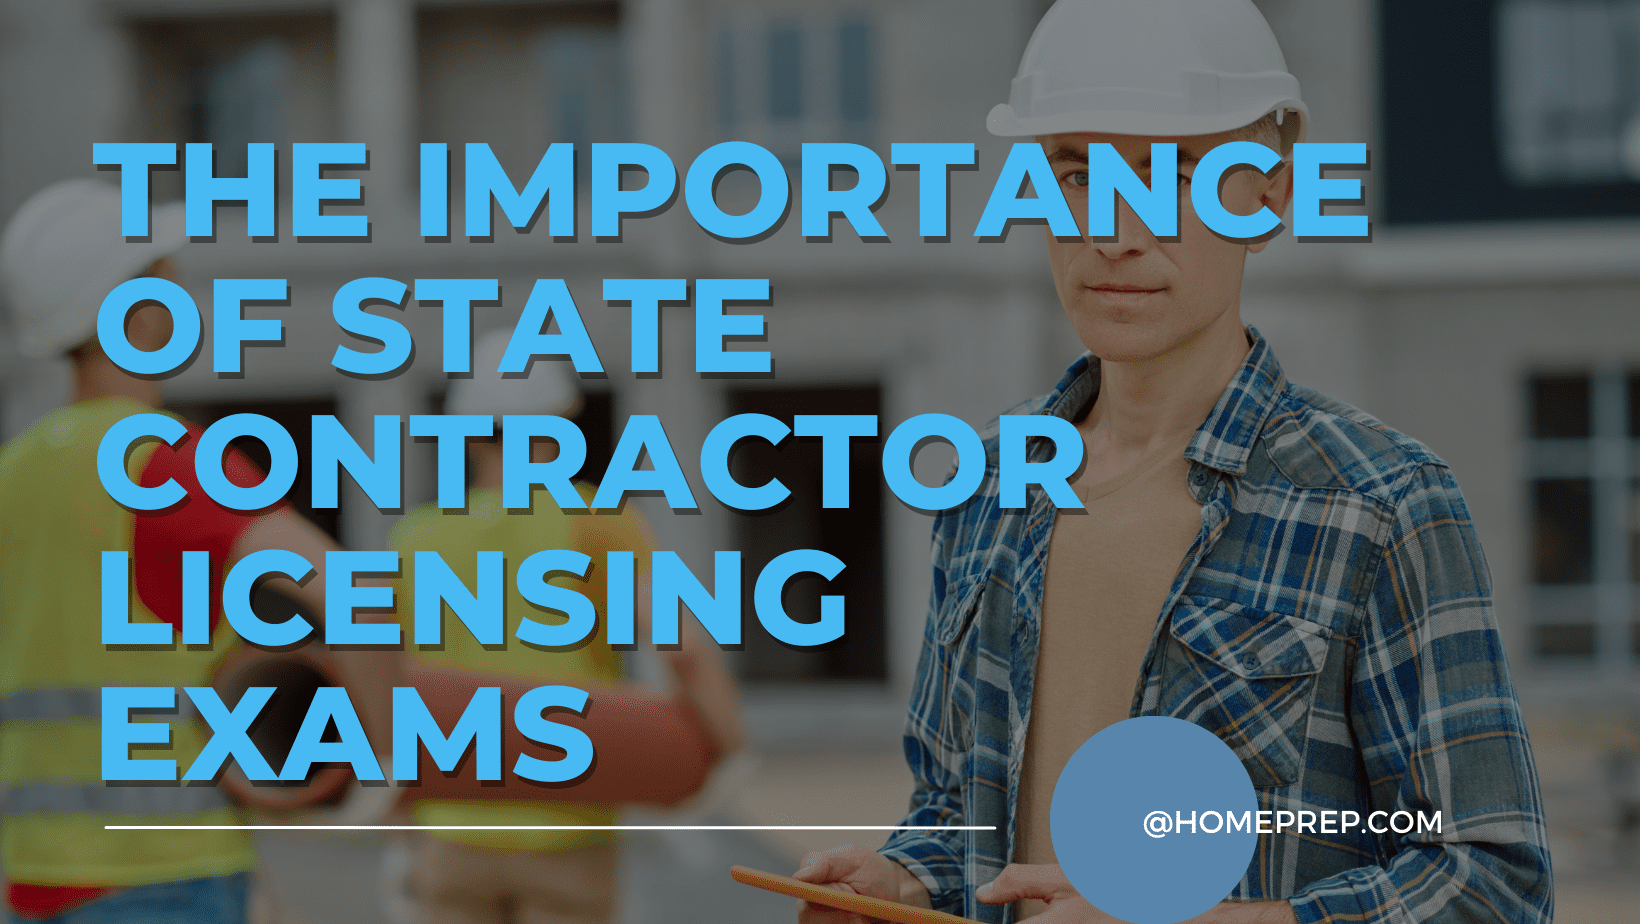 Understanding the Importance of State Contractor Licensing Exams